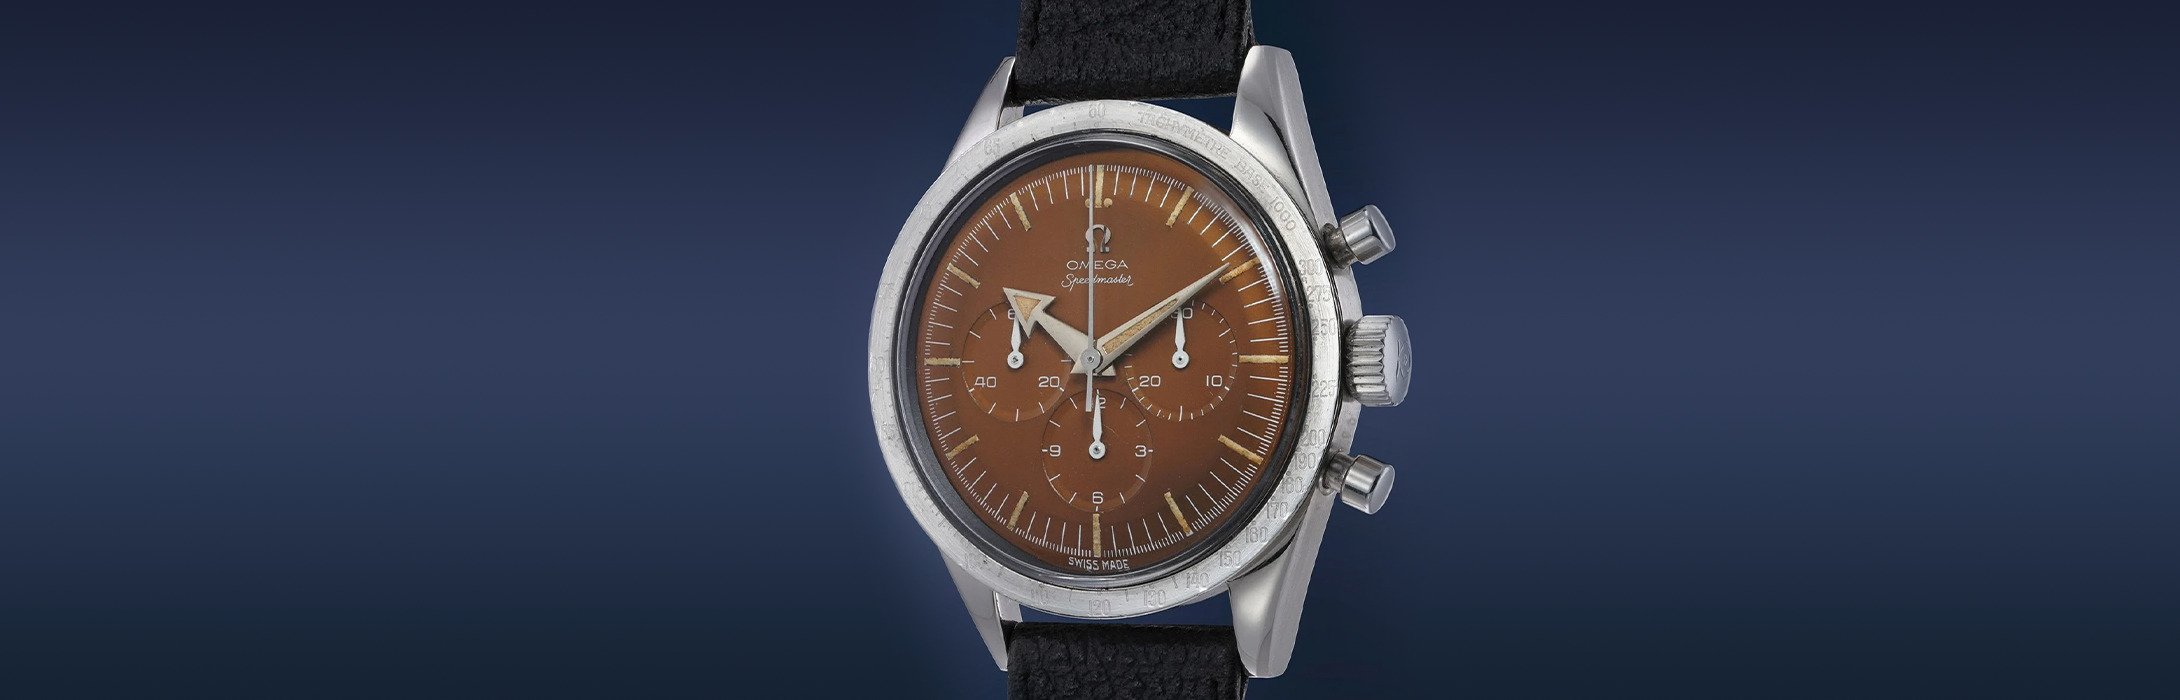 Omega Limited Editions Louis Brandt Watches